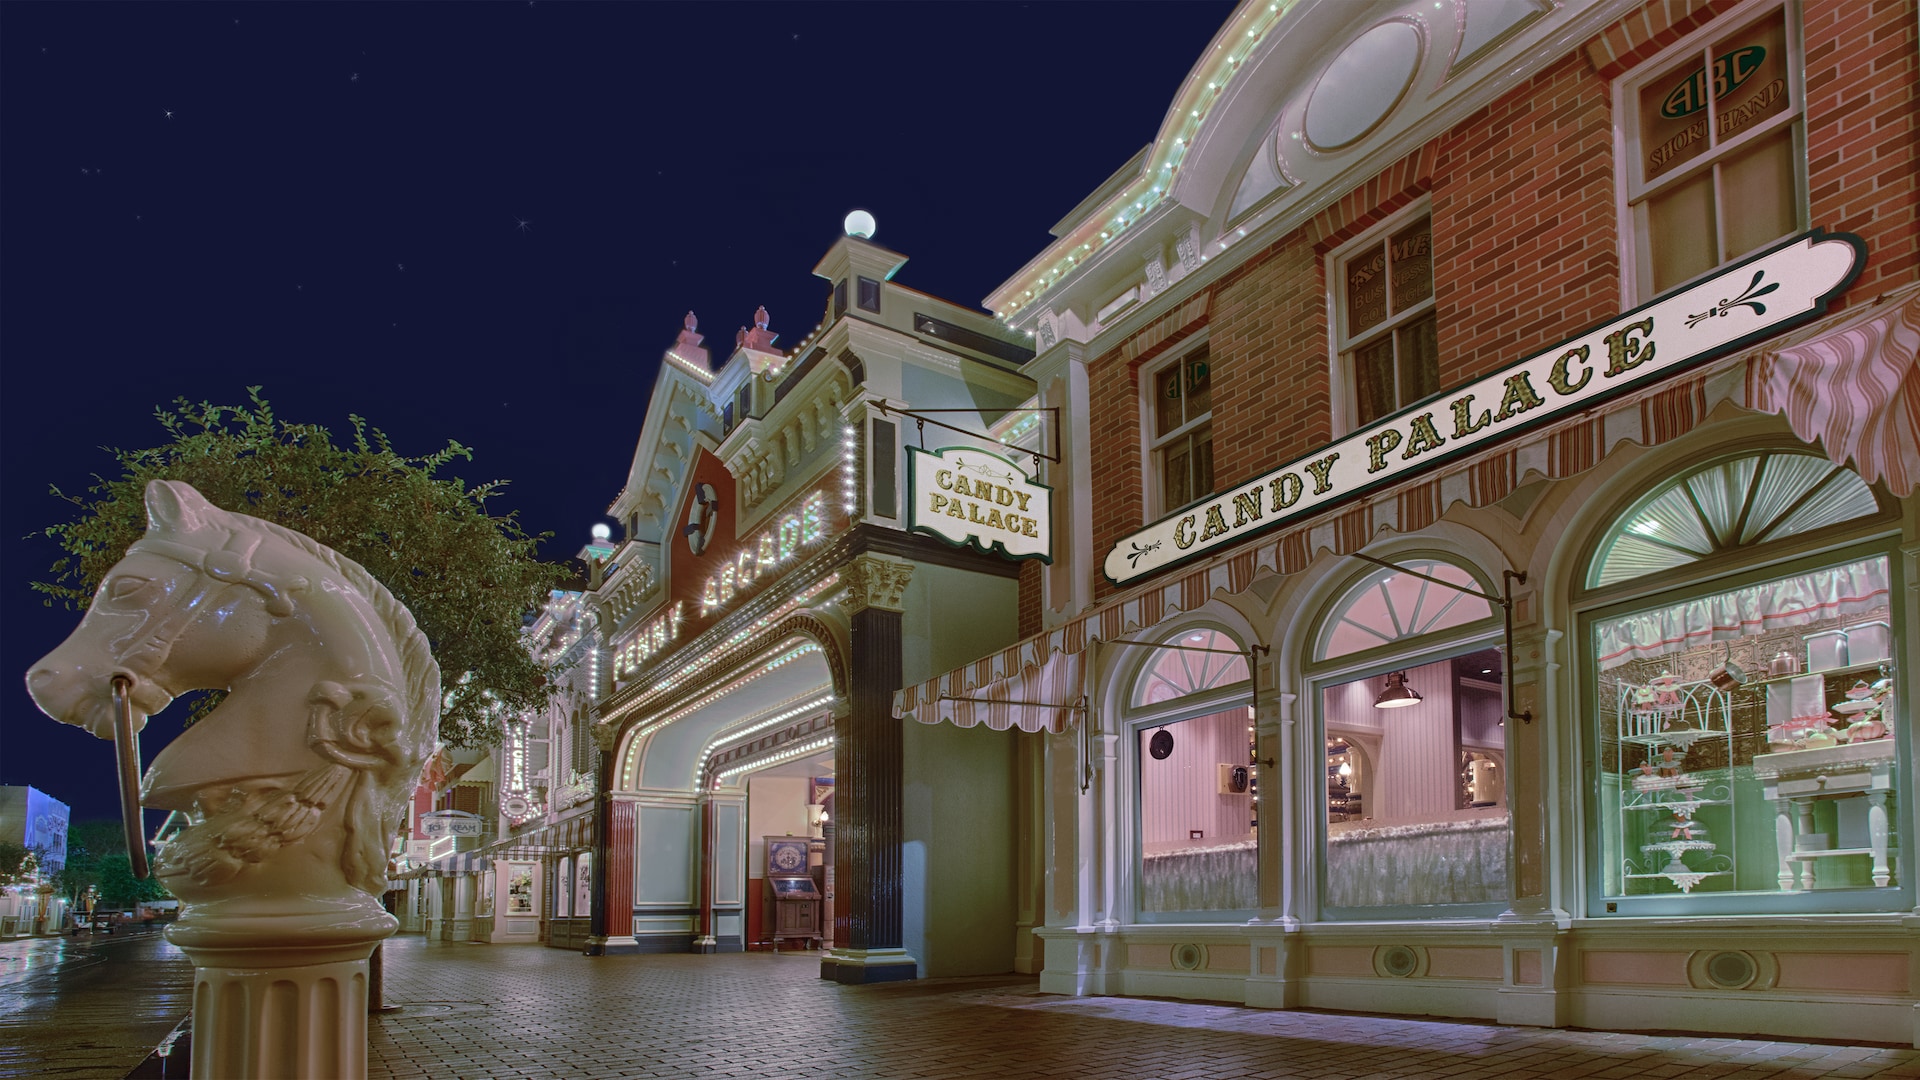 The Candy Palace and Penny Arcade lighting up the night down Main Street, U.S.A. at Disneyland Park